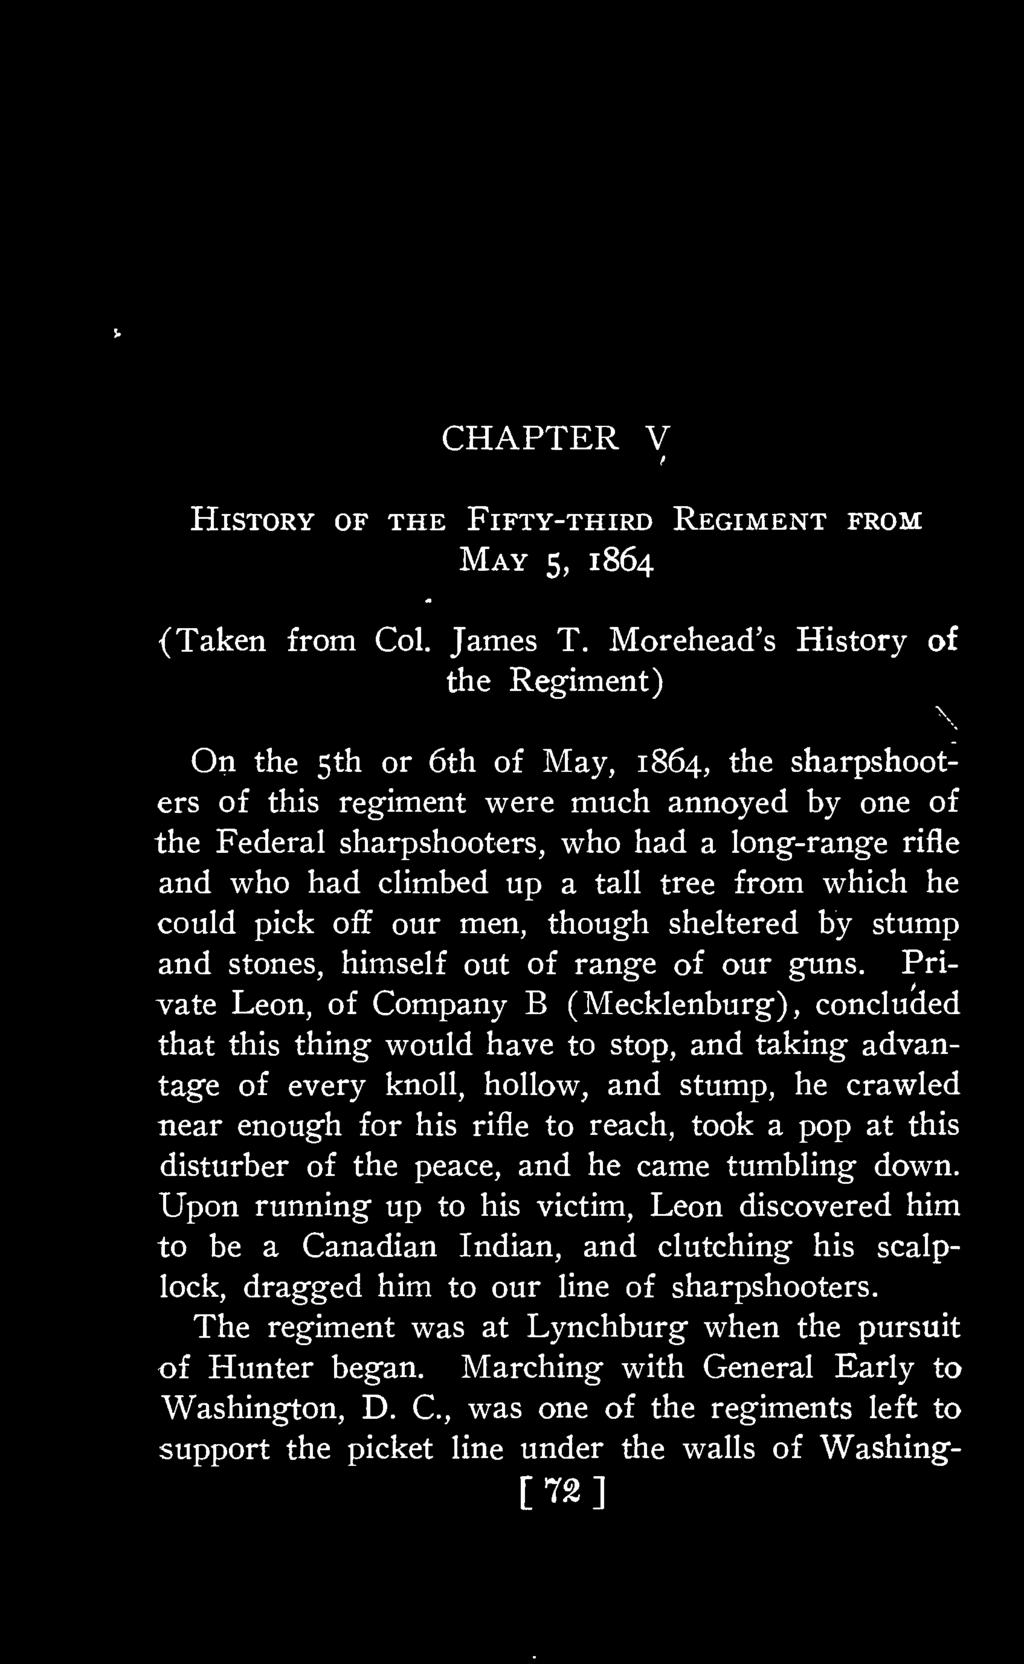 CHAPTER V History of the Fifty-third May 5, 1864 Regiment from (Taken from Col. James T.